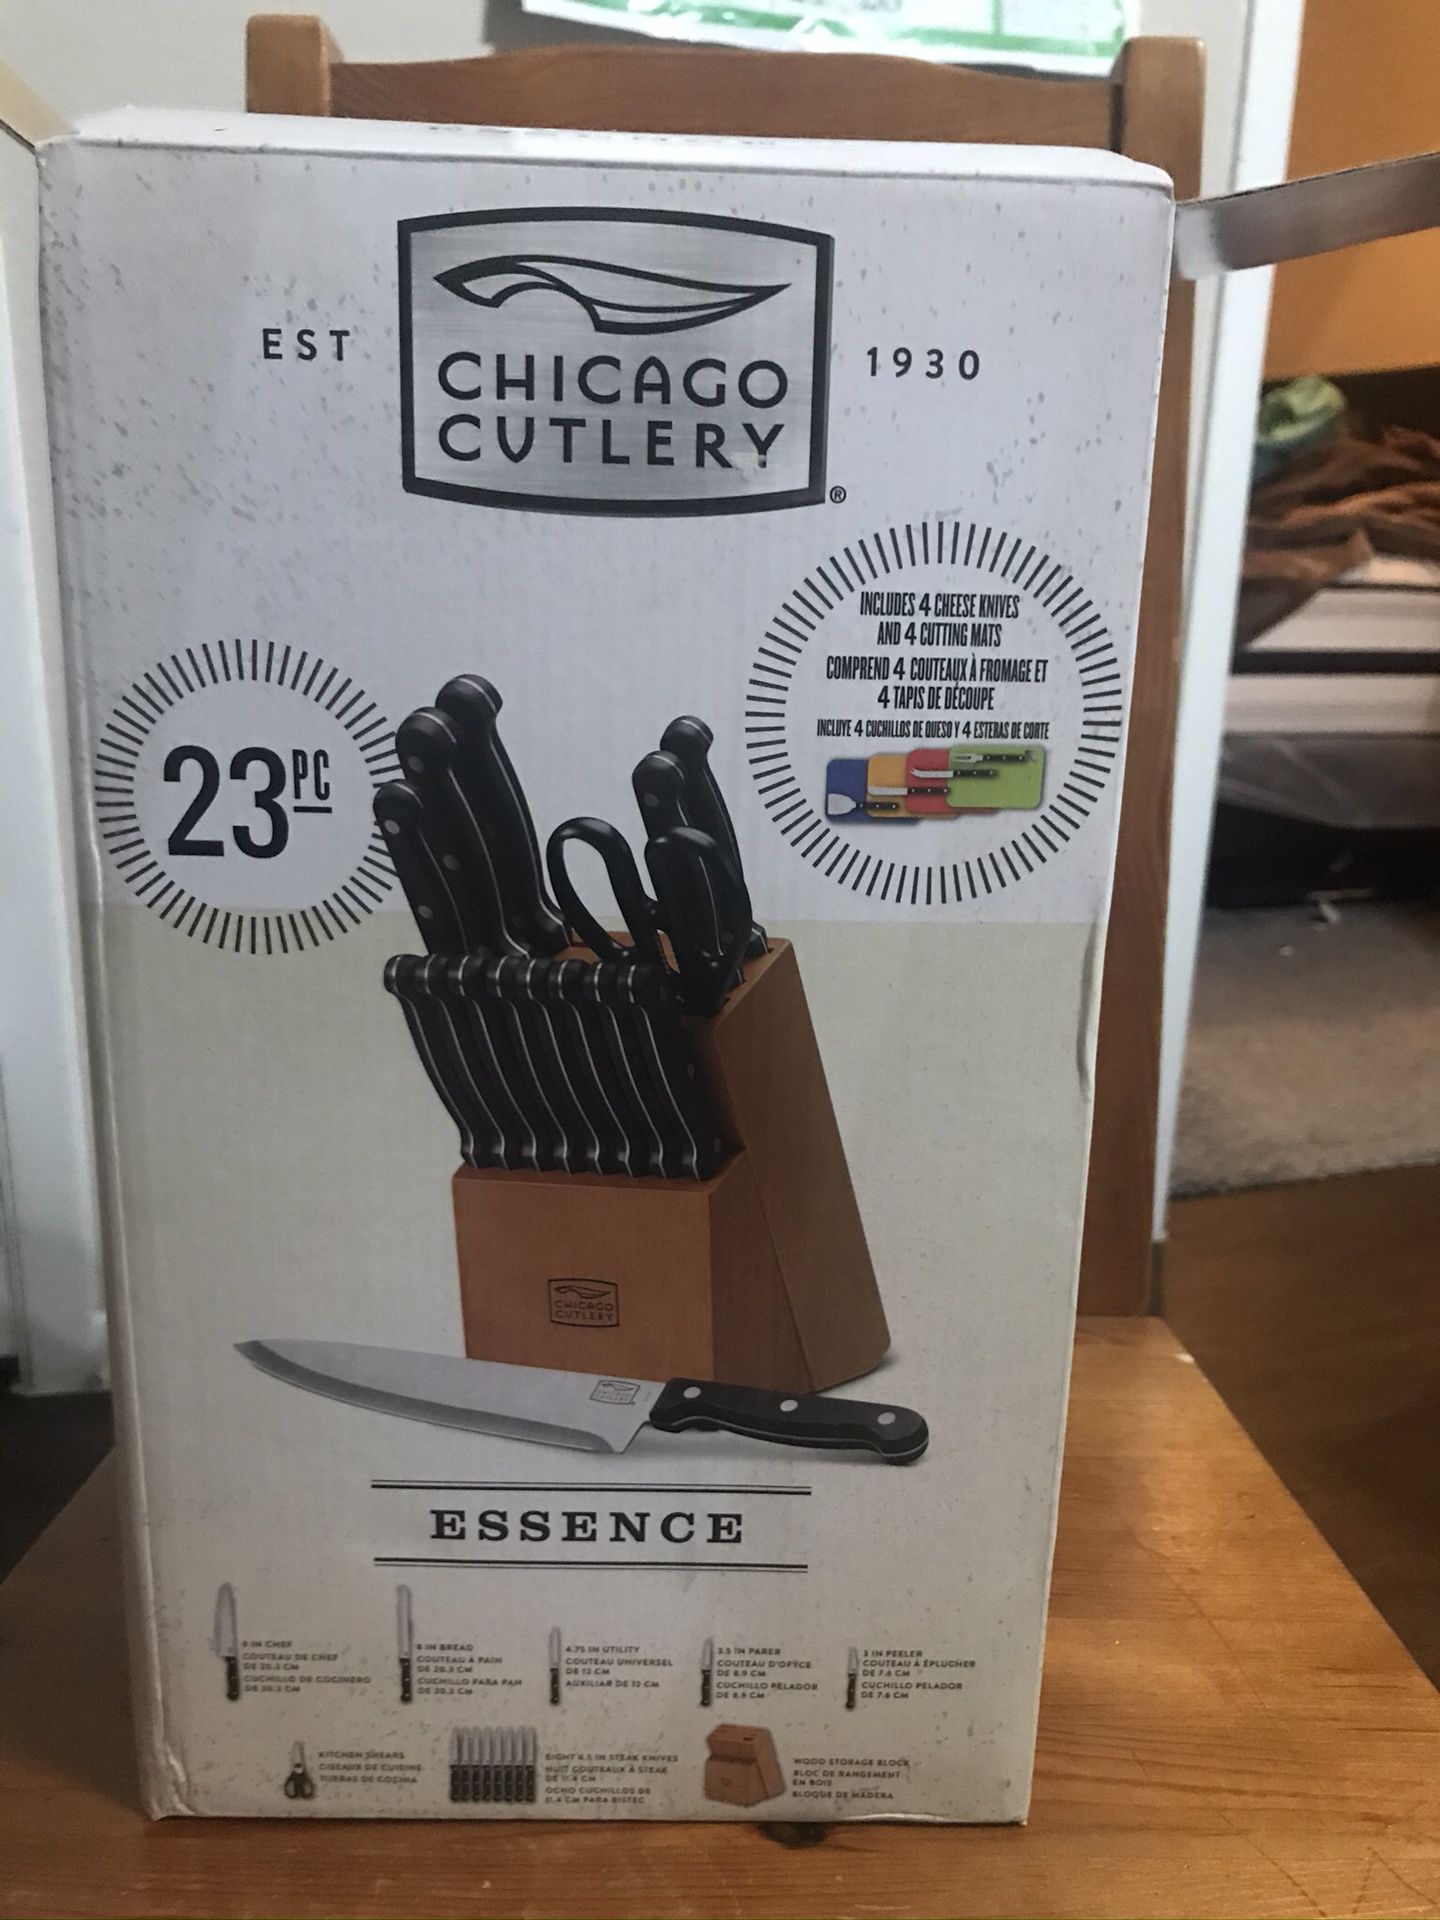 Chicago Cutlery’s